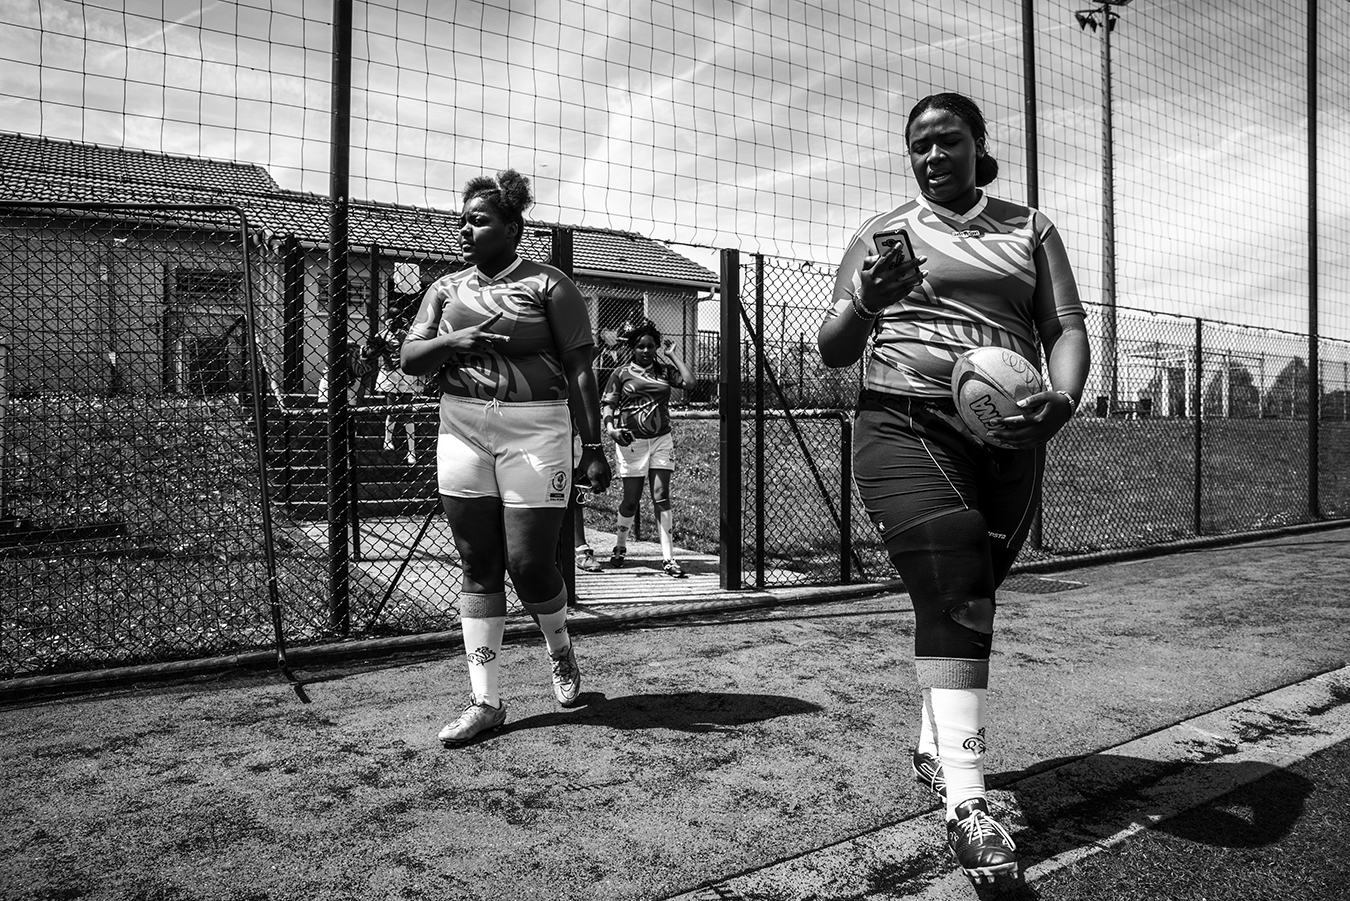 Still from the sound slideshow Les Rugbywomen (2017). Photo by Camilo Leon-Quijano.